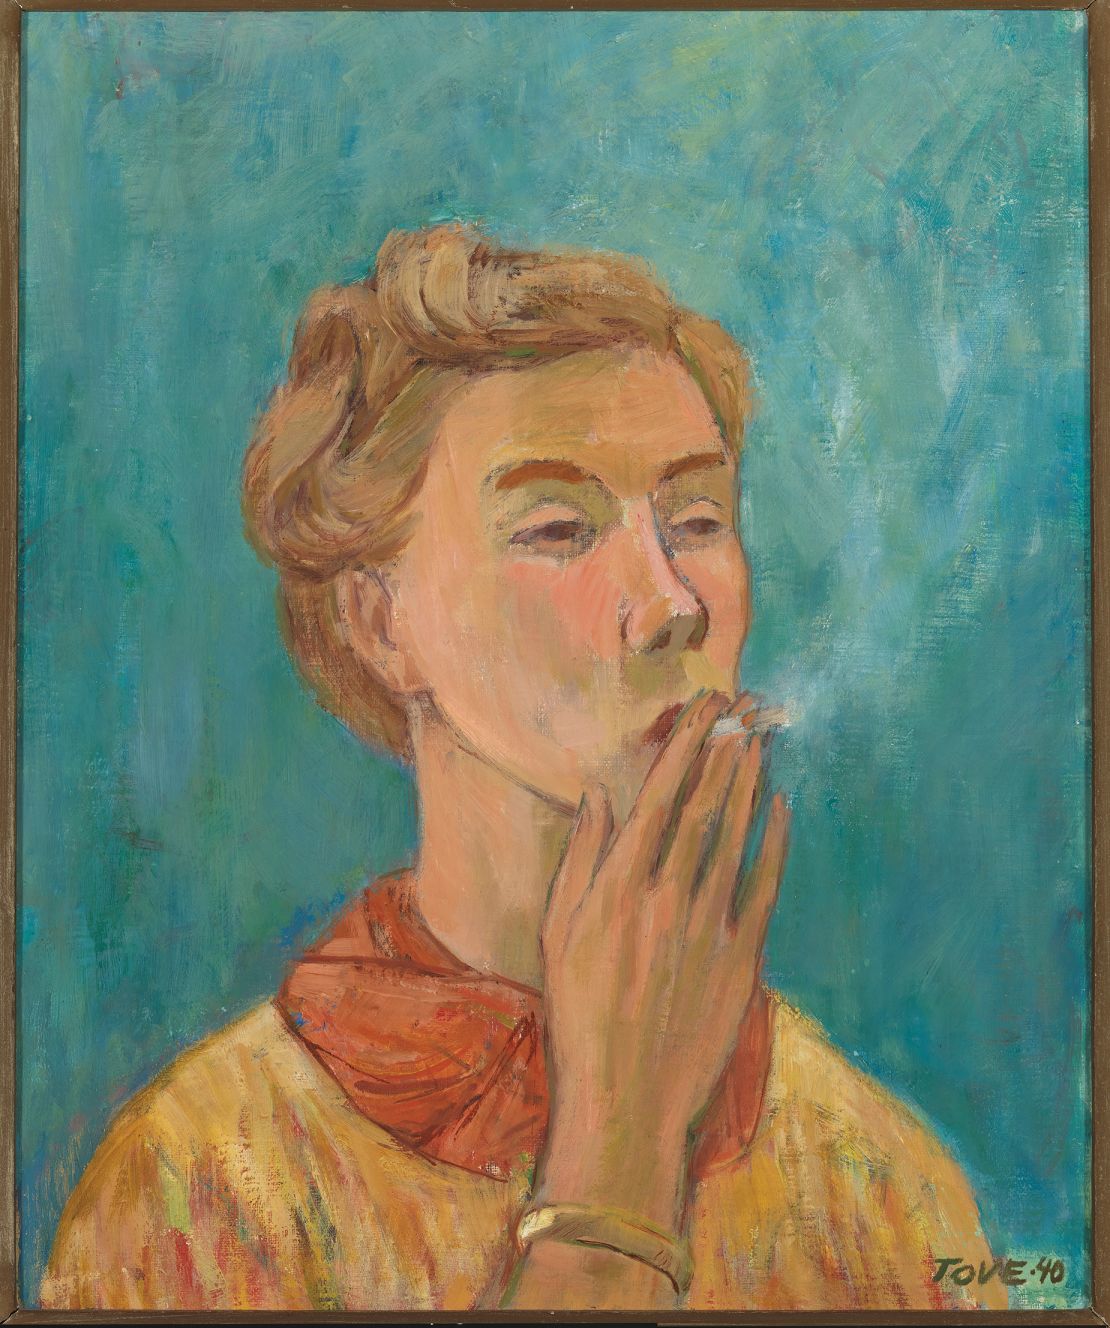 Tove Jansson's "Smoking Girl (Self portrait)", painted in 1940. © Tove Jansson Estate.